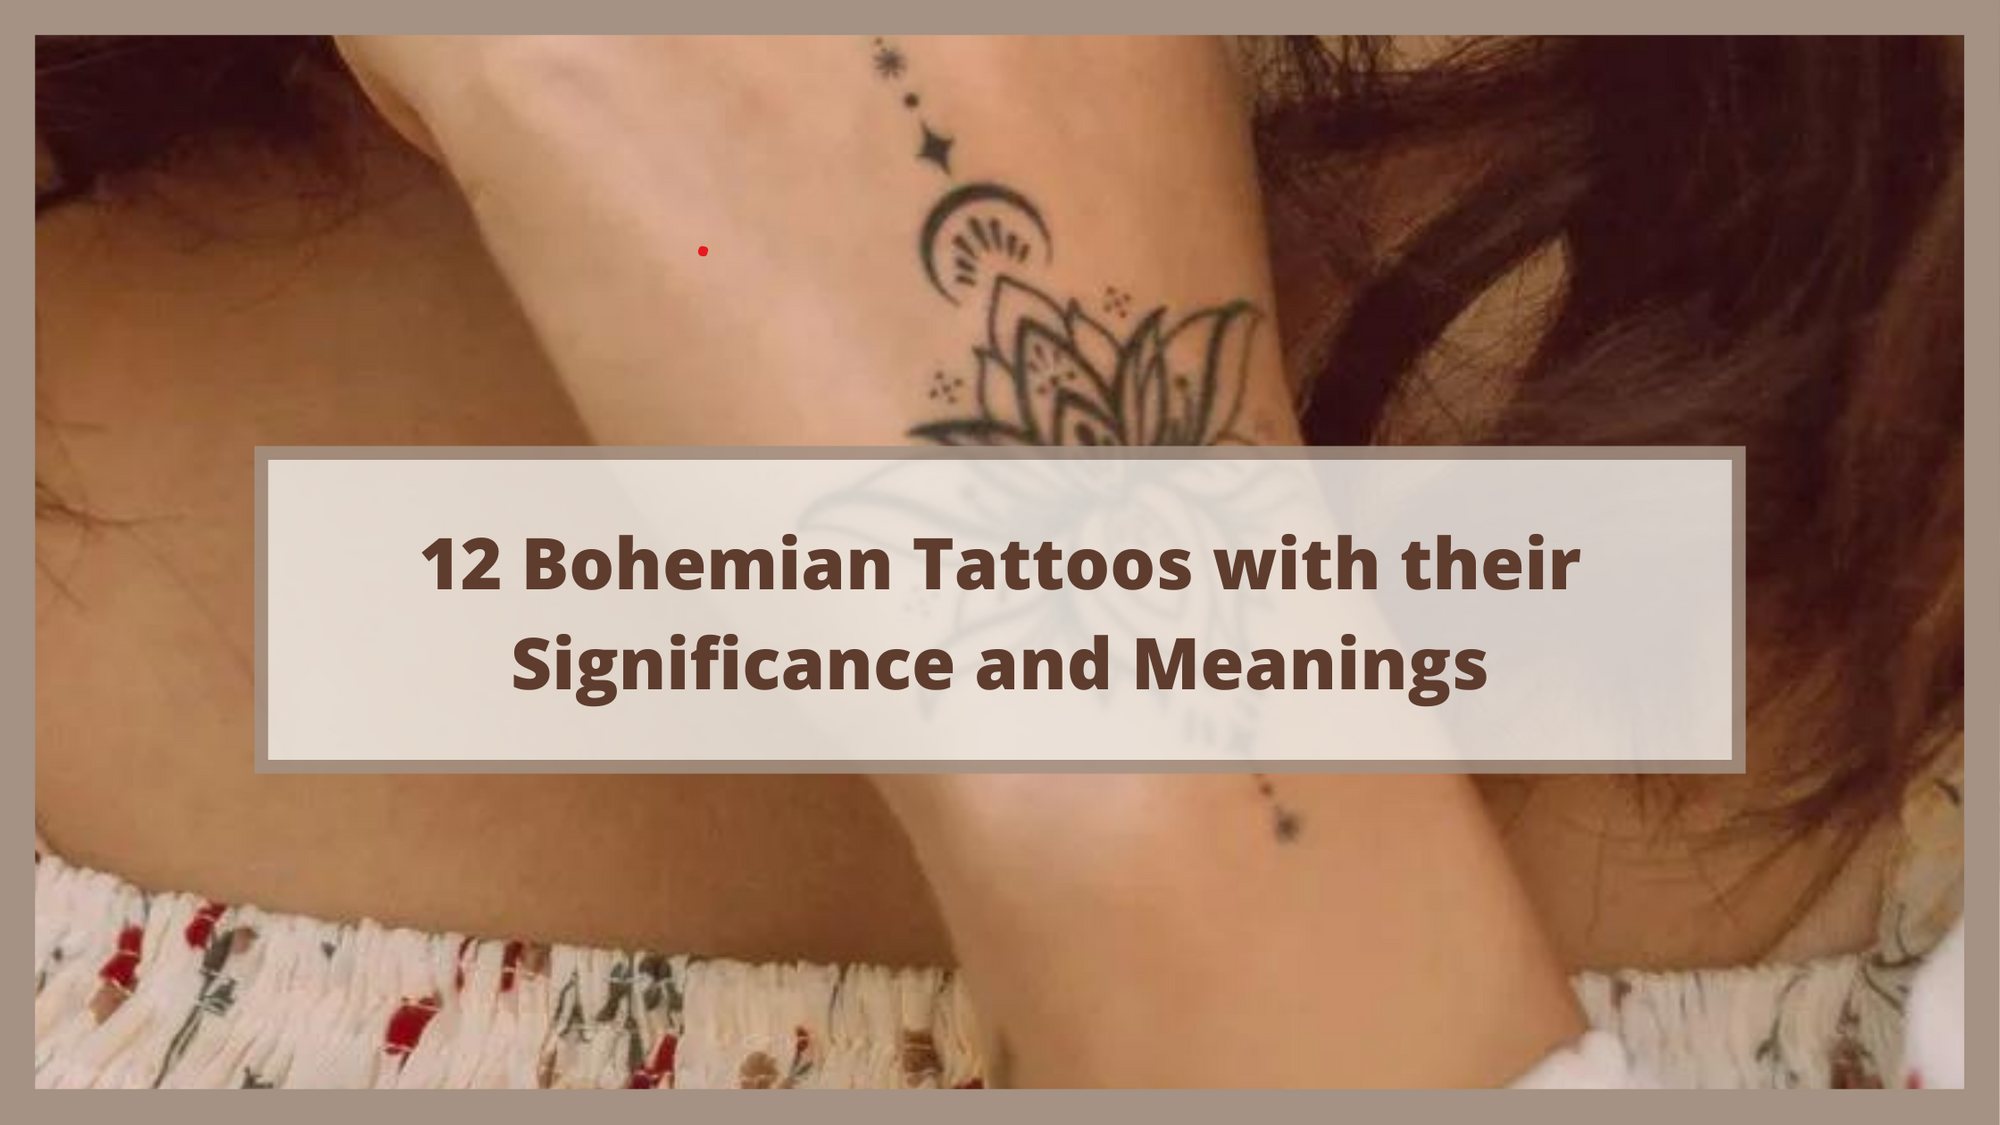 12 Bohemian Tattoos with their Significance and Meanings